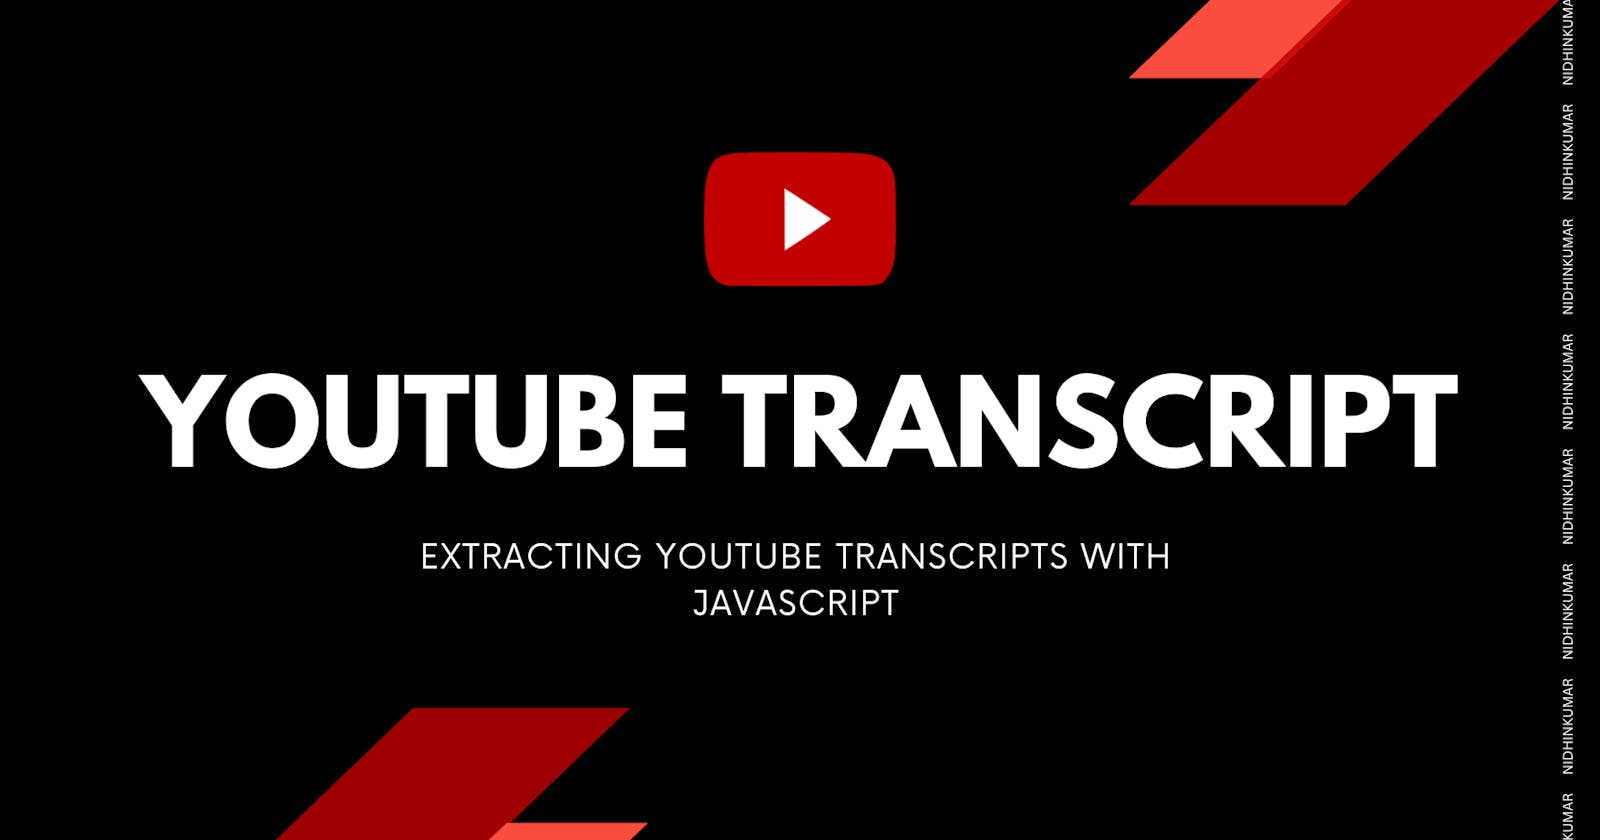 Extracting YouTube Transcripts with JavaScript